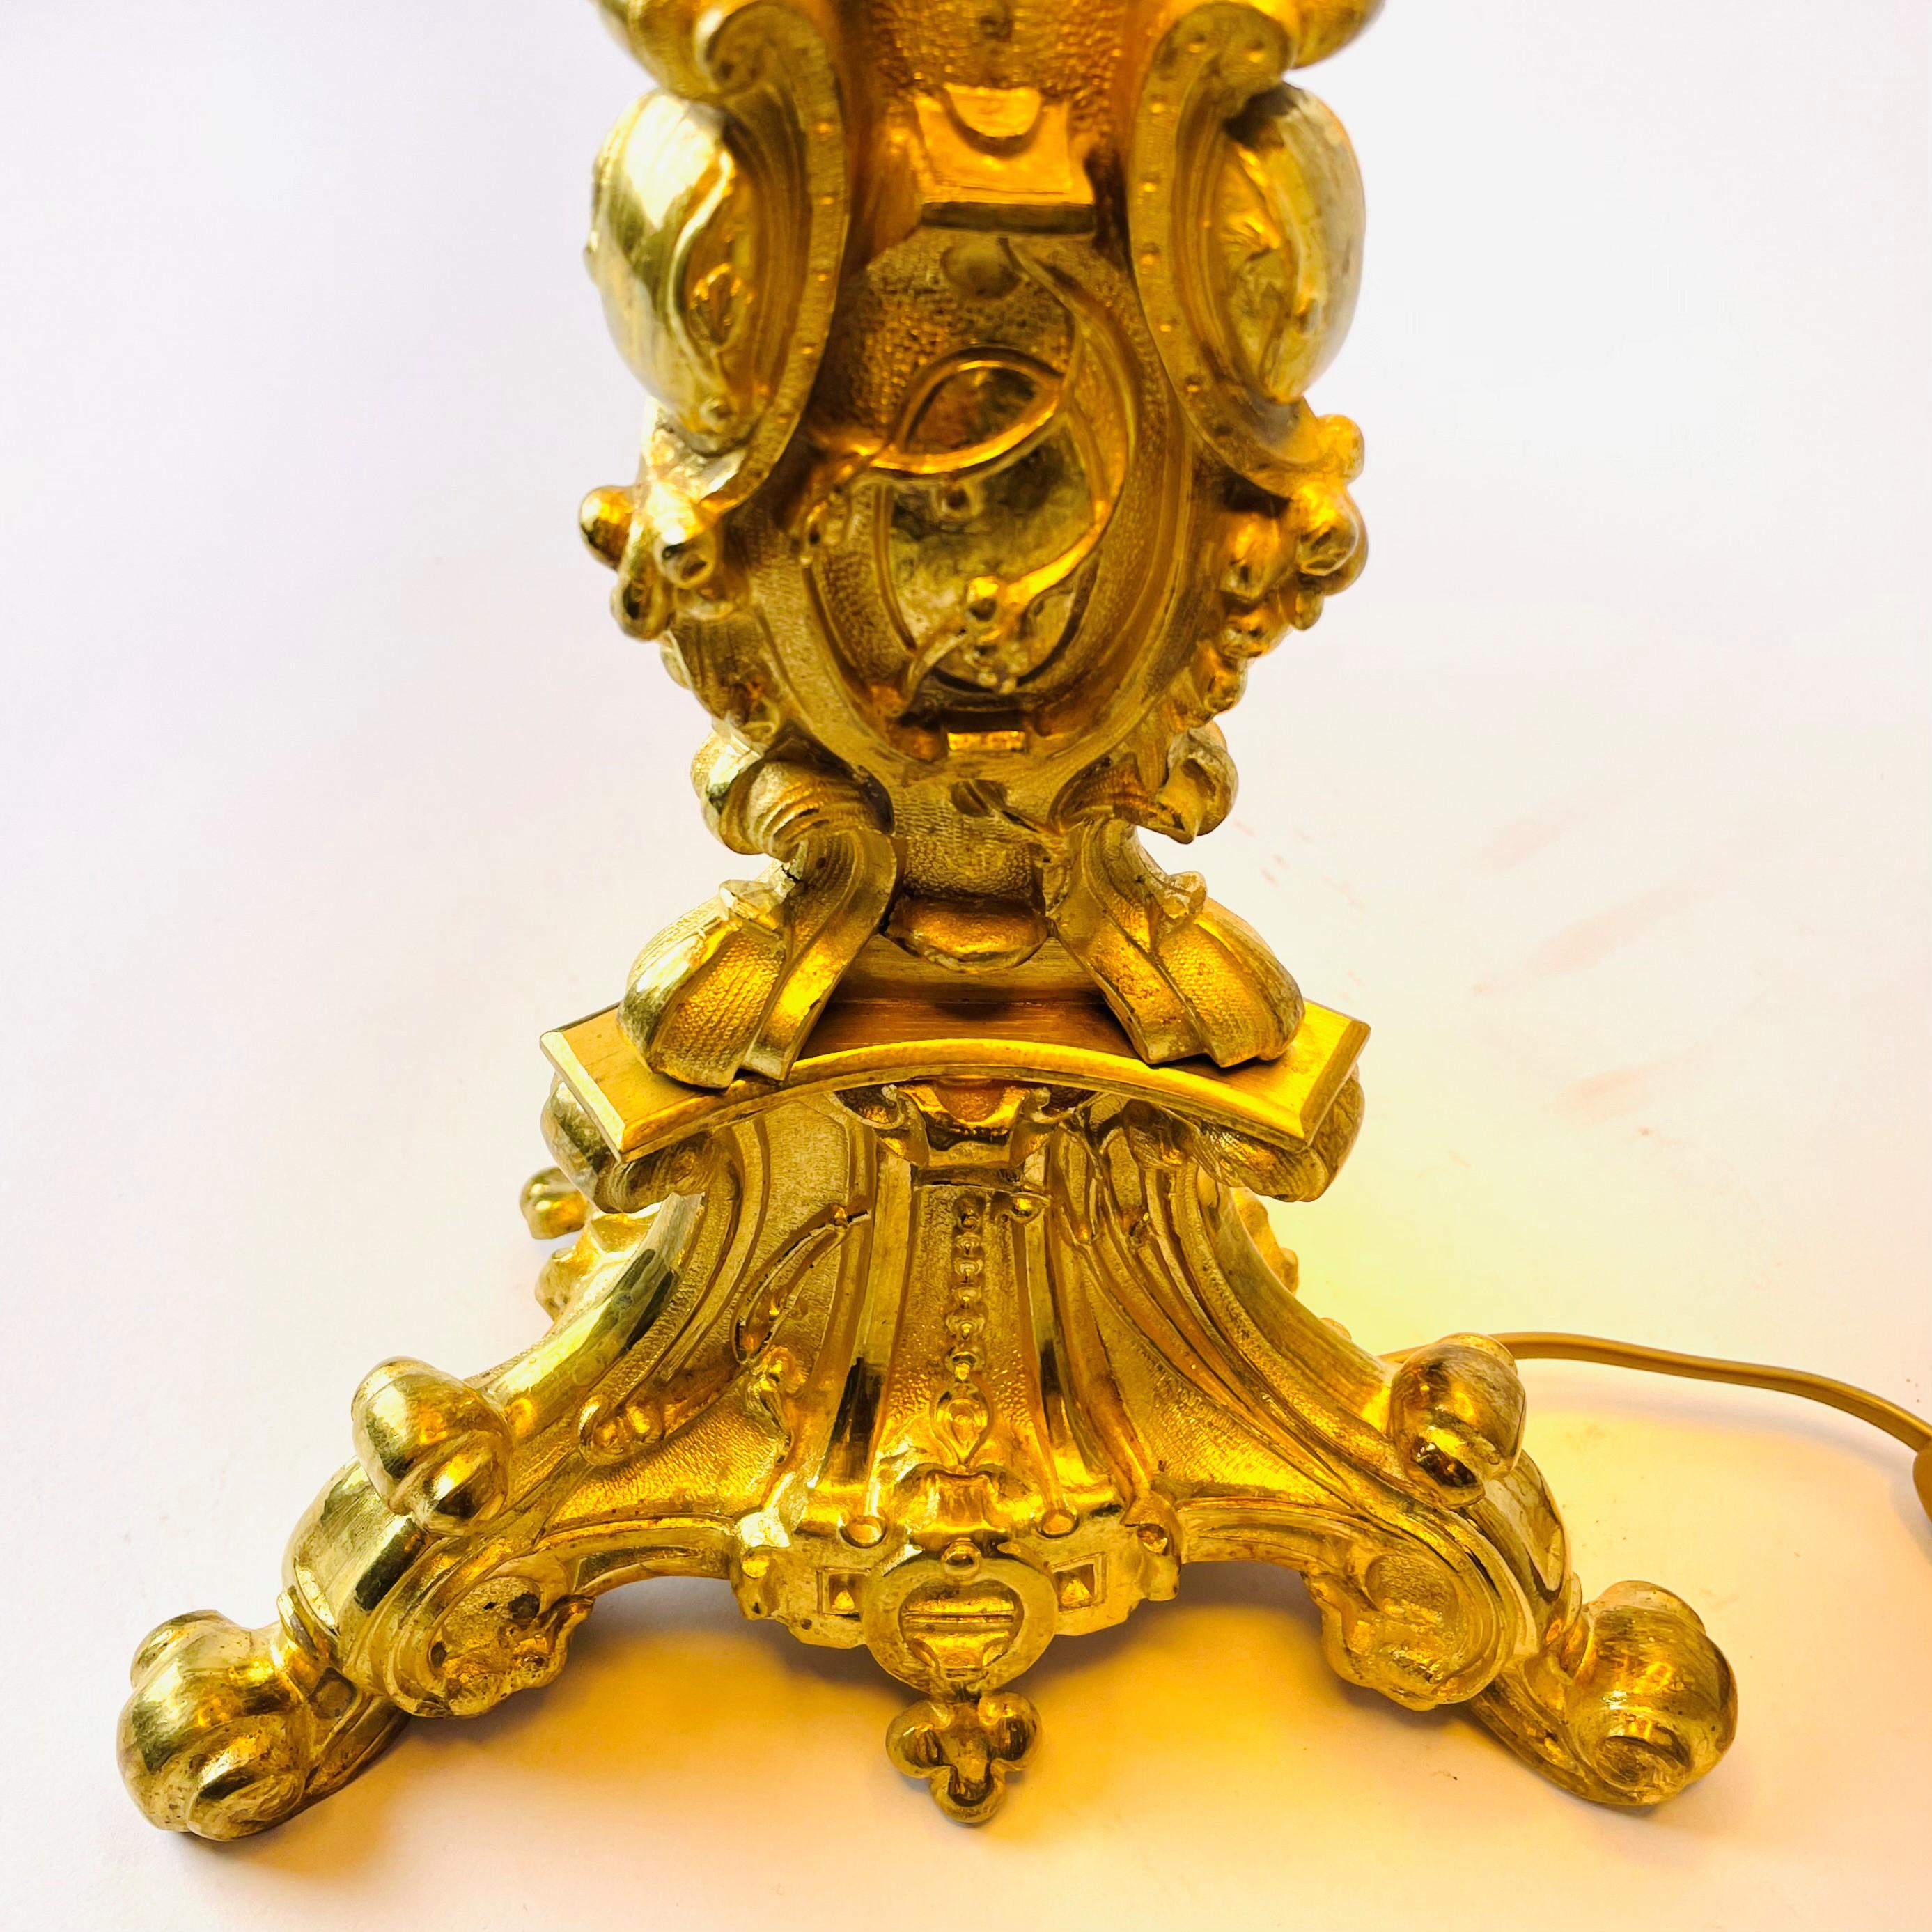 Gold Plate Large Rococo Revival Table Lamp in Gilded Bronze, Mid-19th Century For Sale